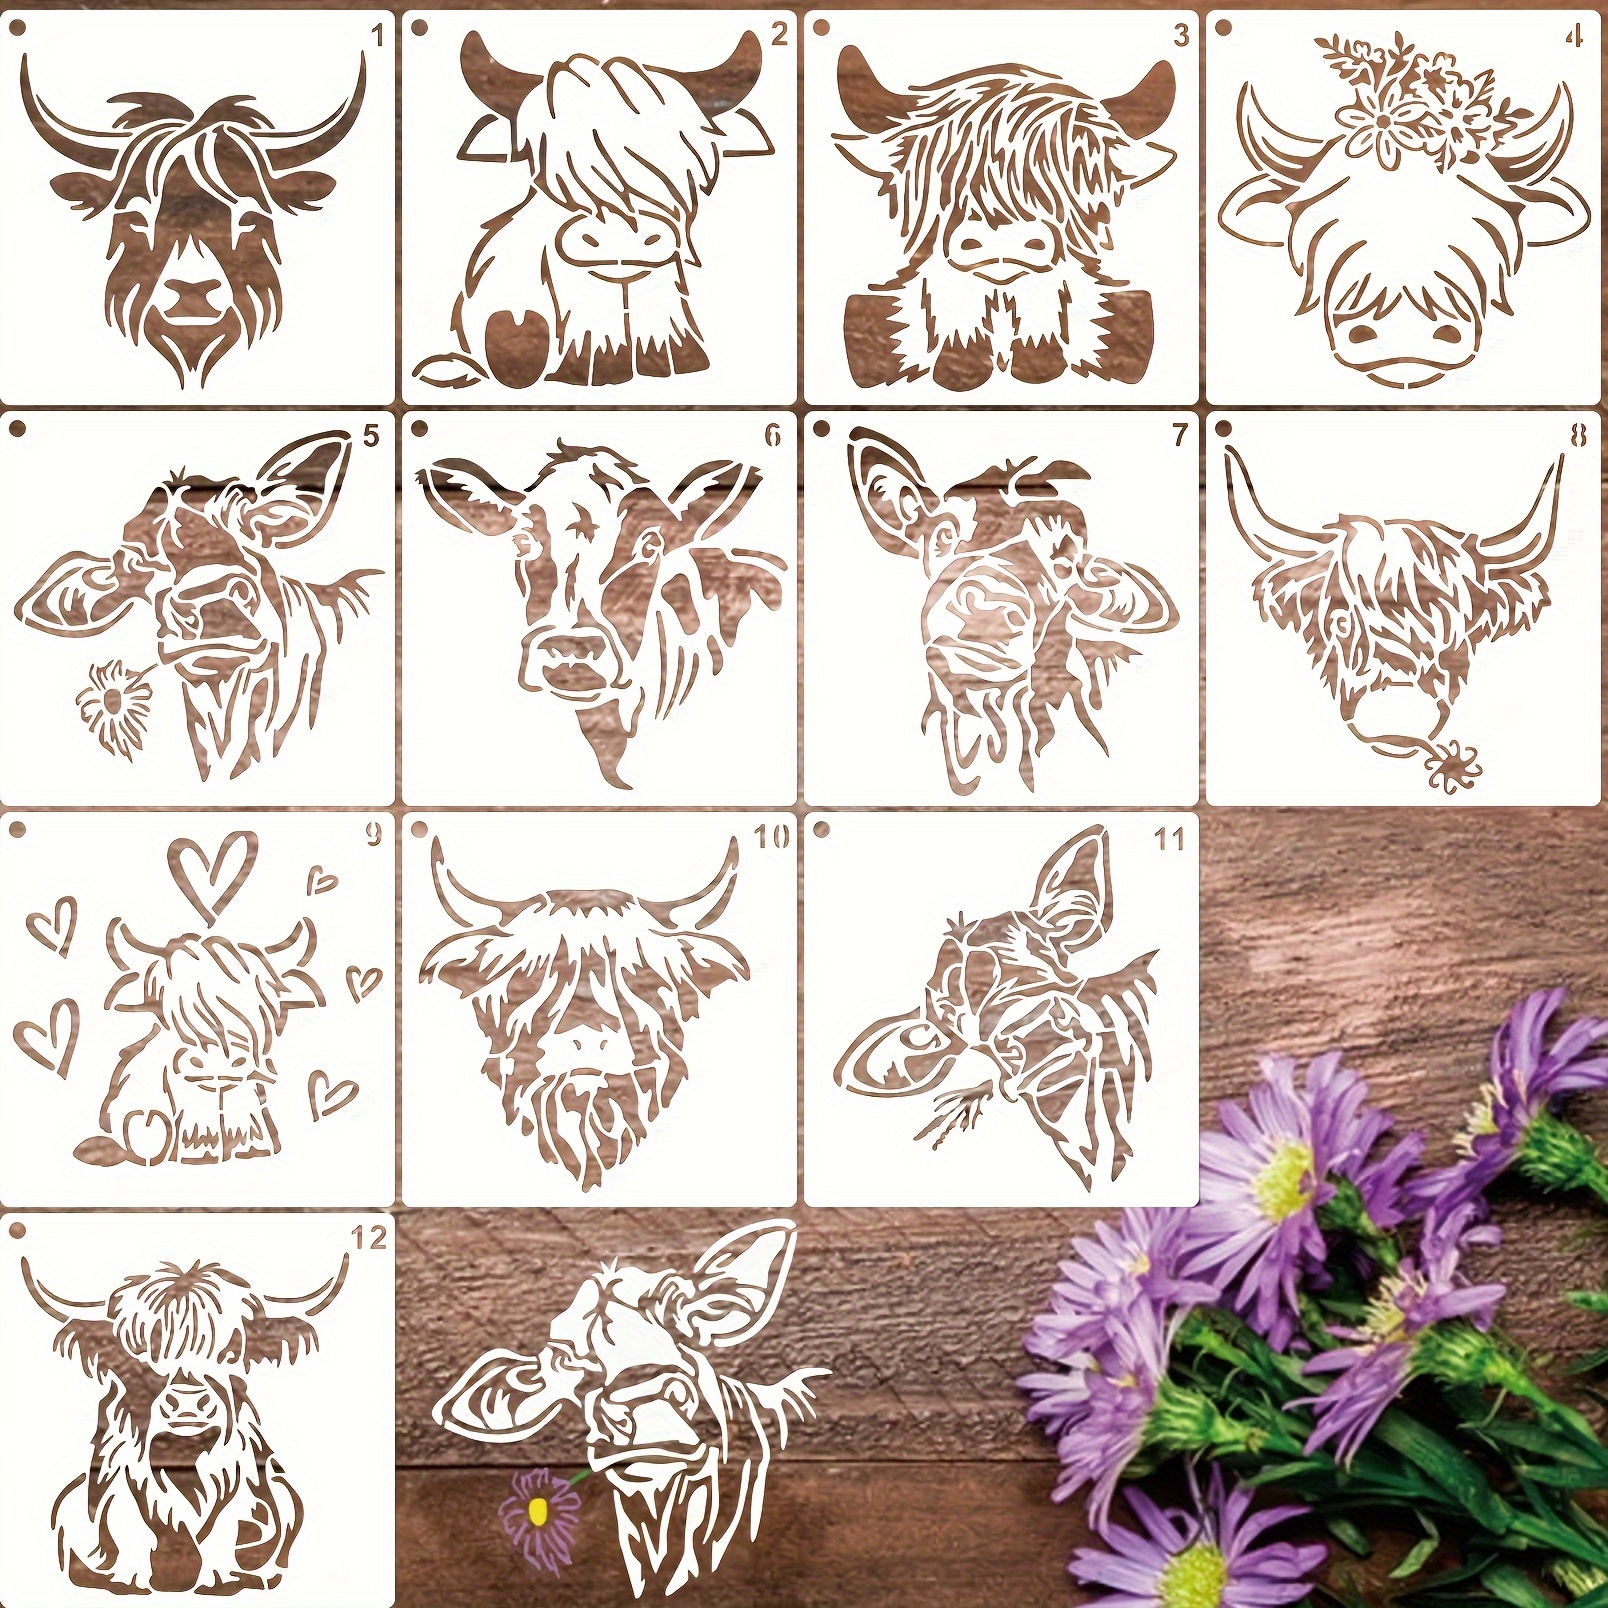 

12pcs Cow Cow Head Farm Animal Cow Print Stencils For Crafts Rock Paint Template Plastic Reusable Stencils For Painting On Wall Tile Shirt Canvas Burning Home